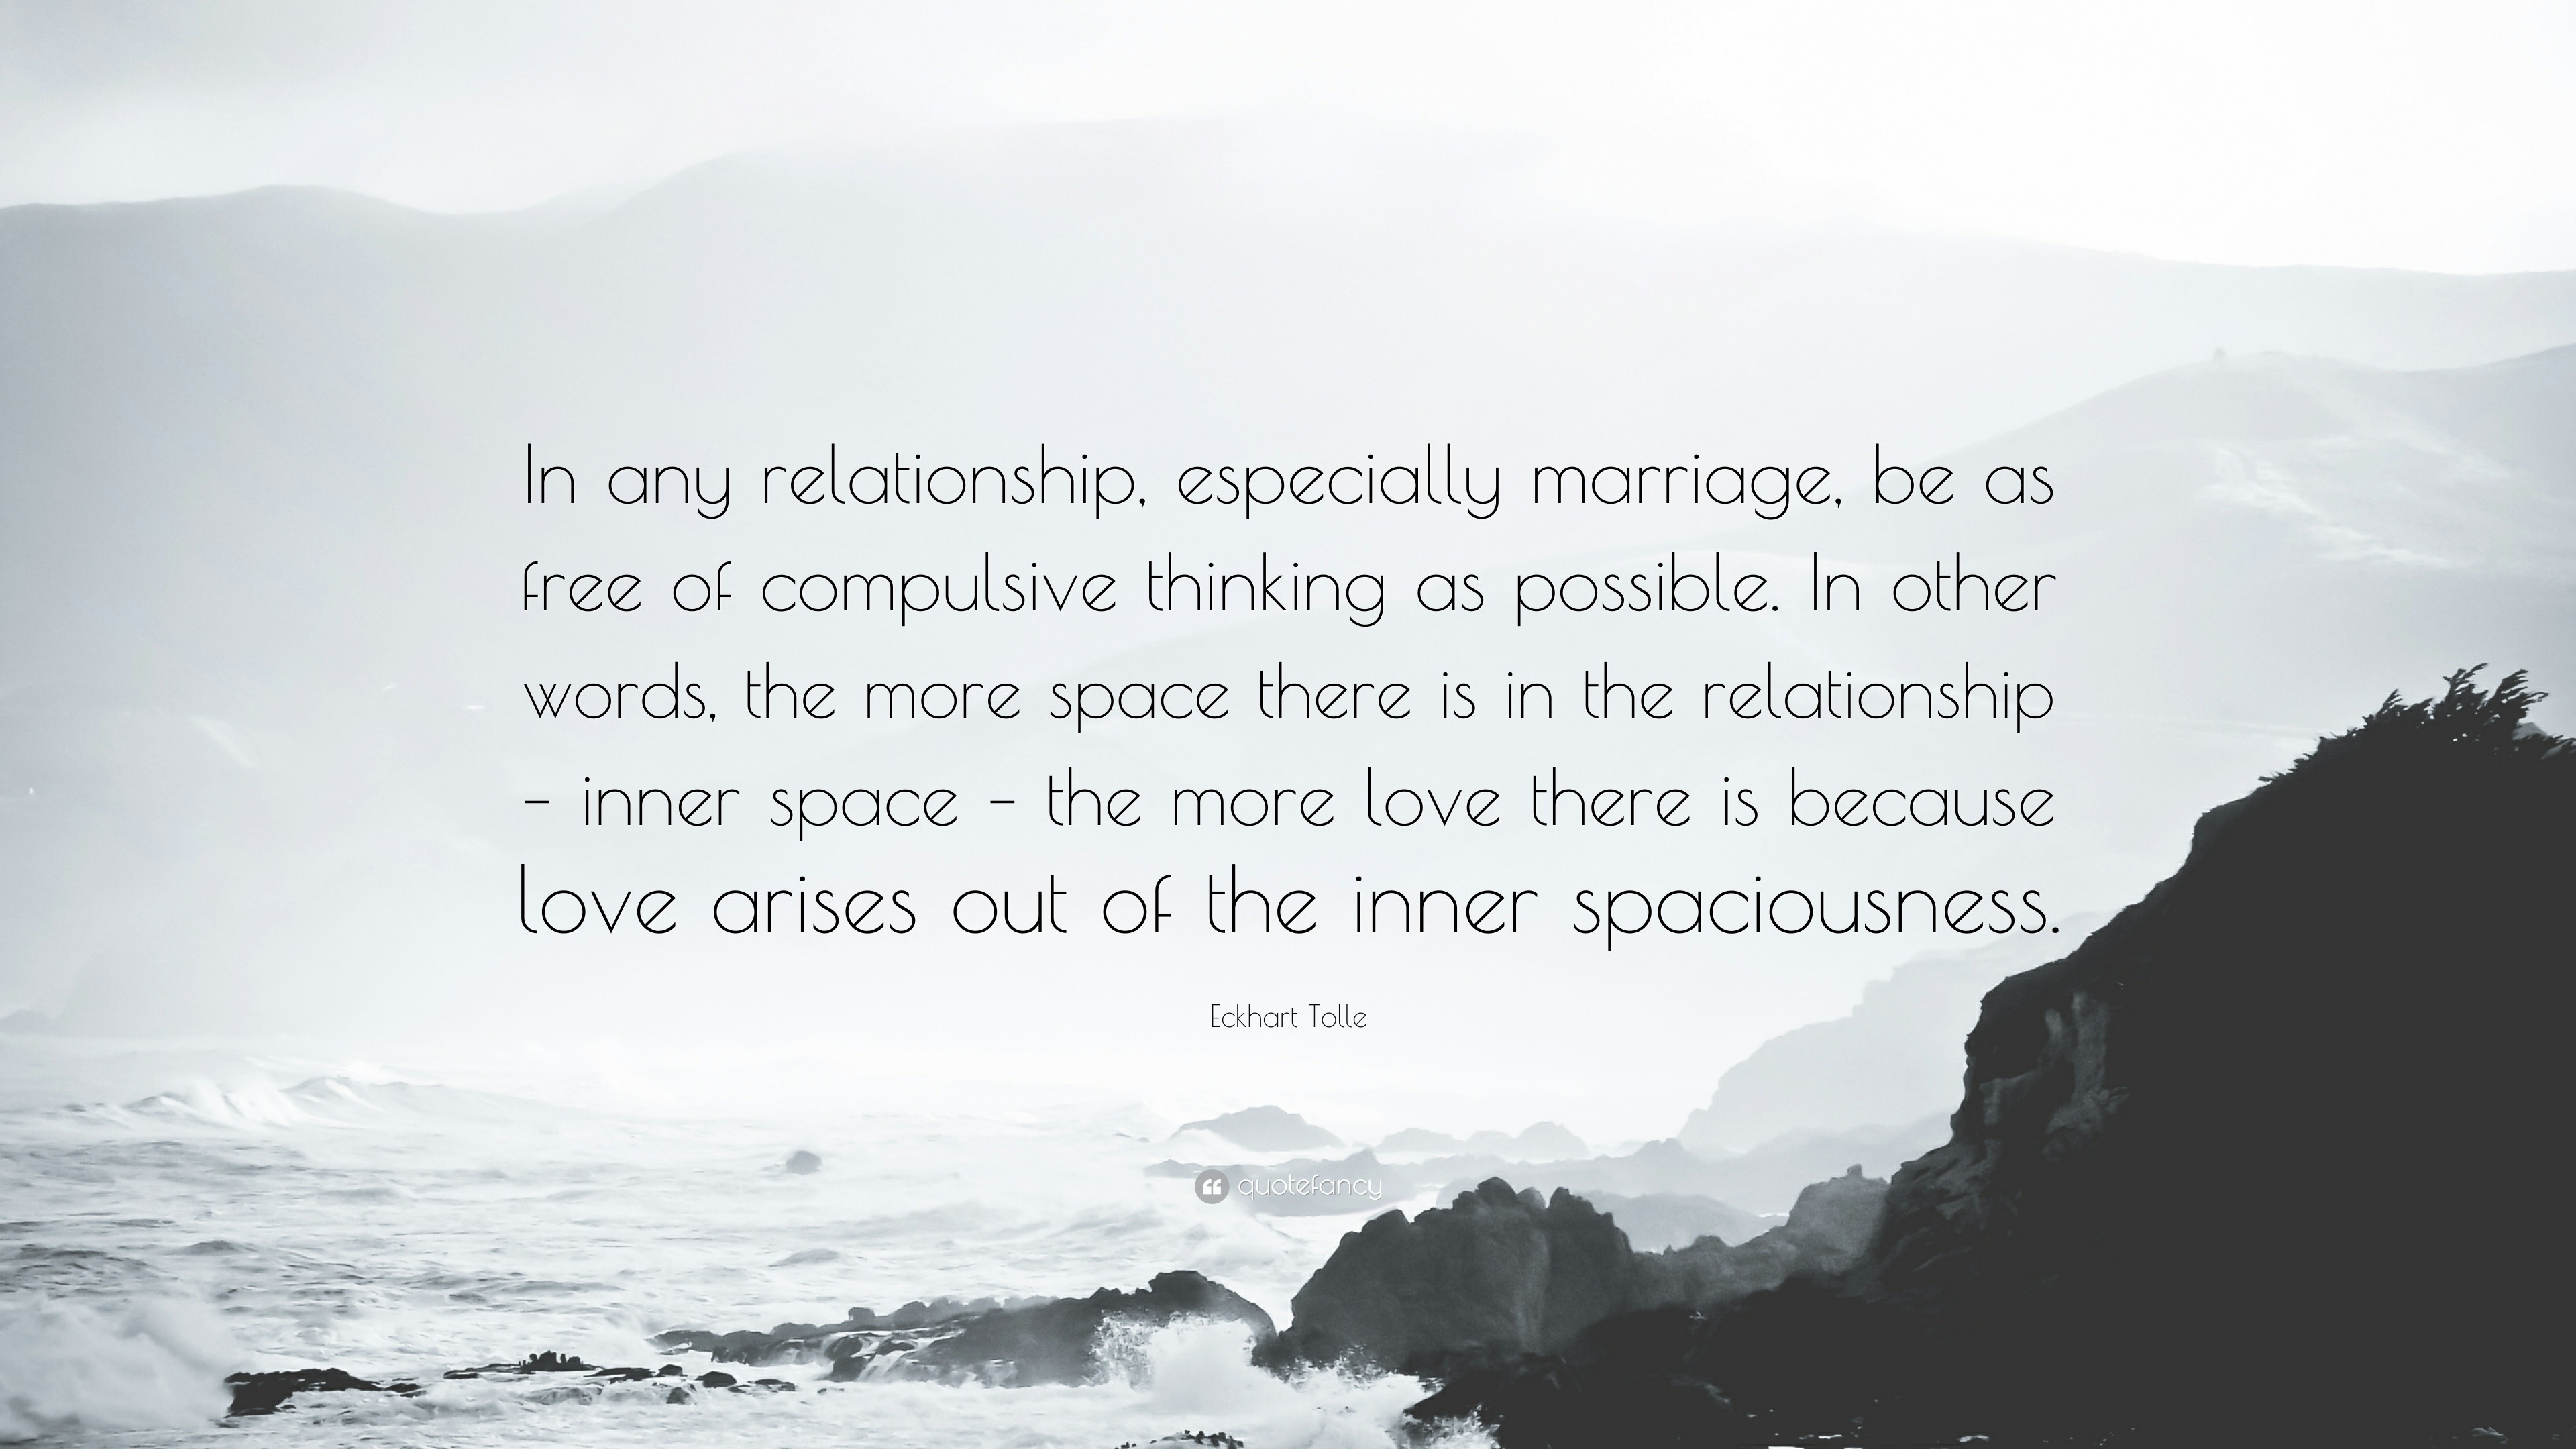 Eckhart Tolle Quote “In any relationship especially marriage be as free of